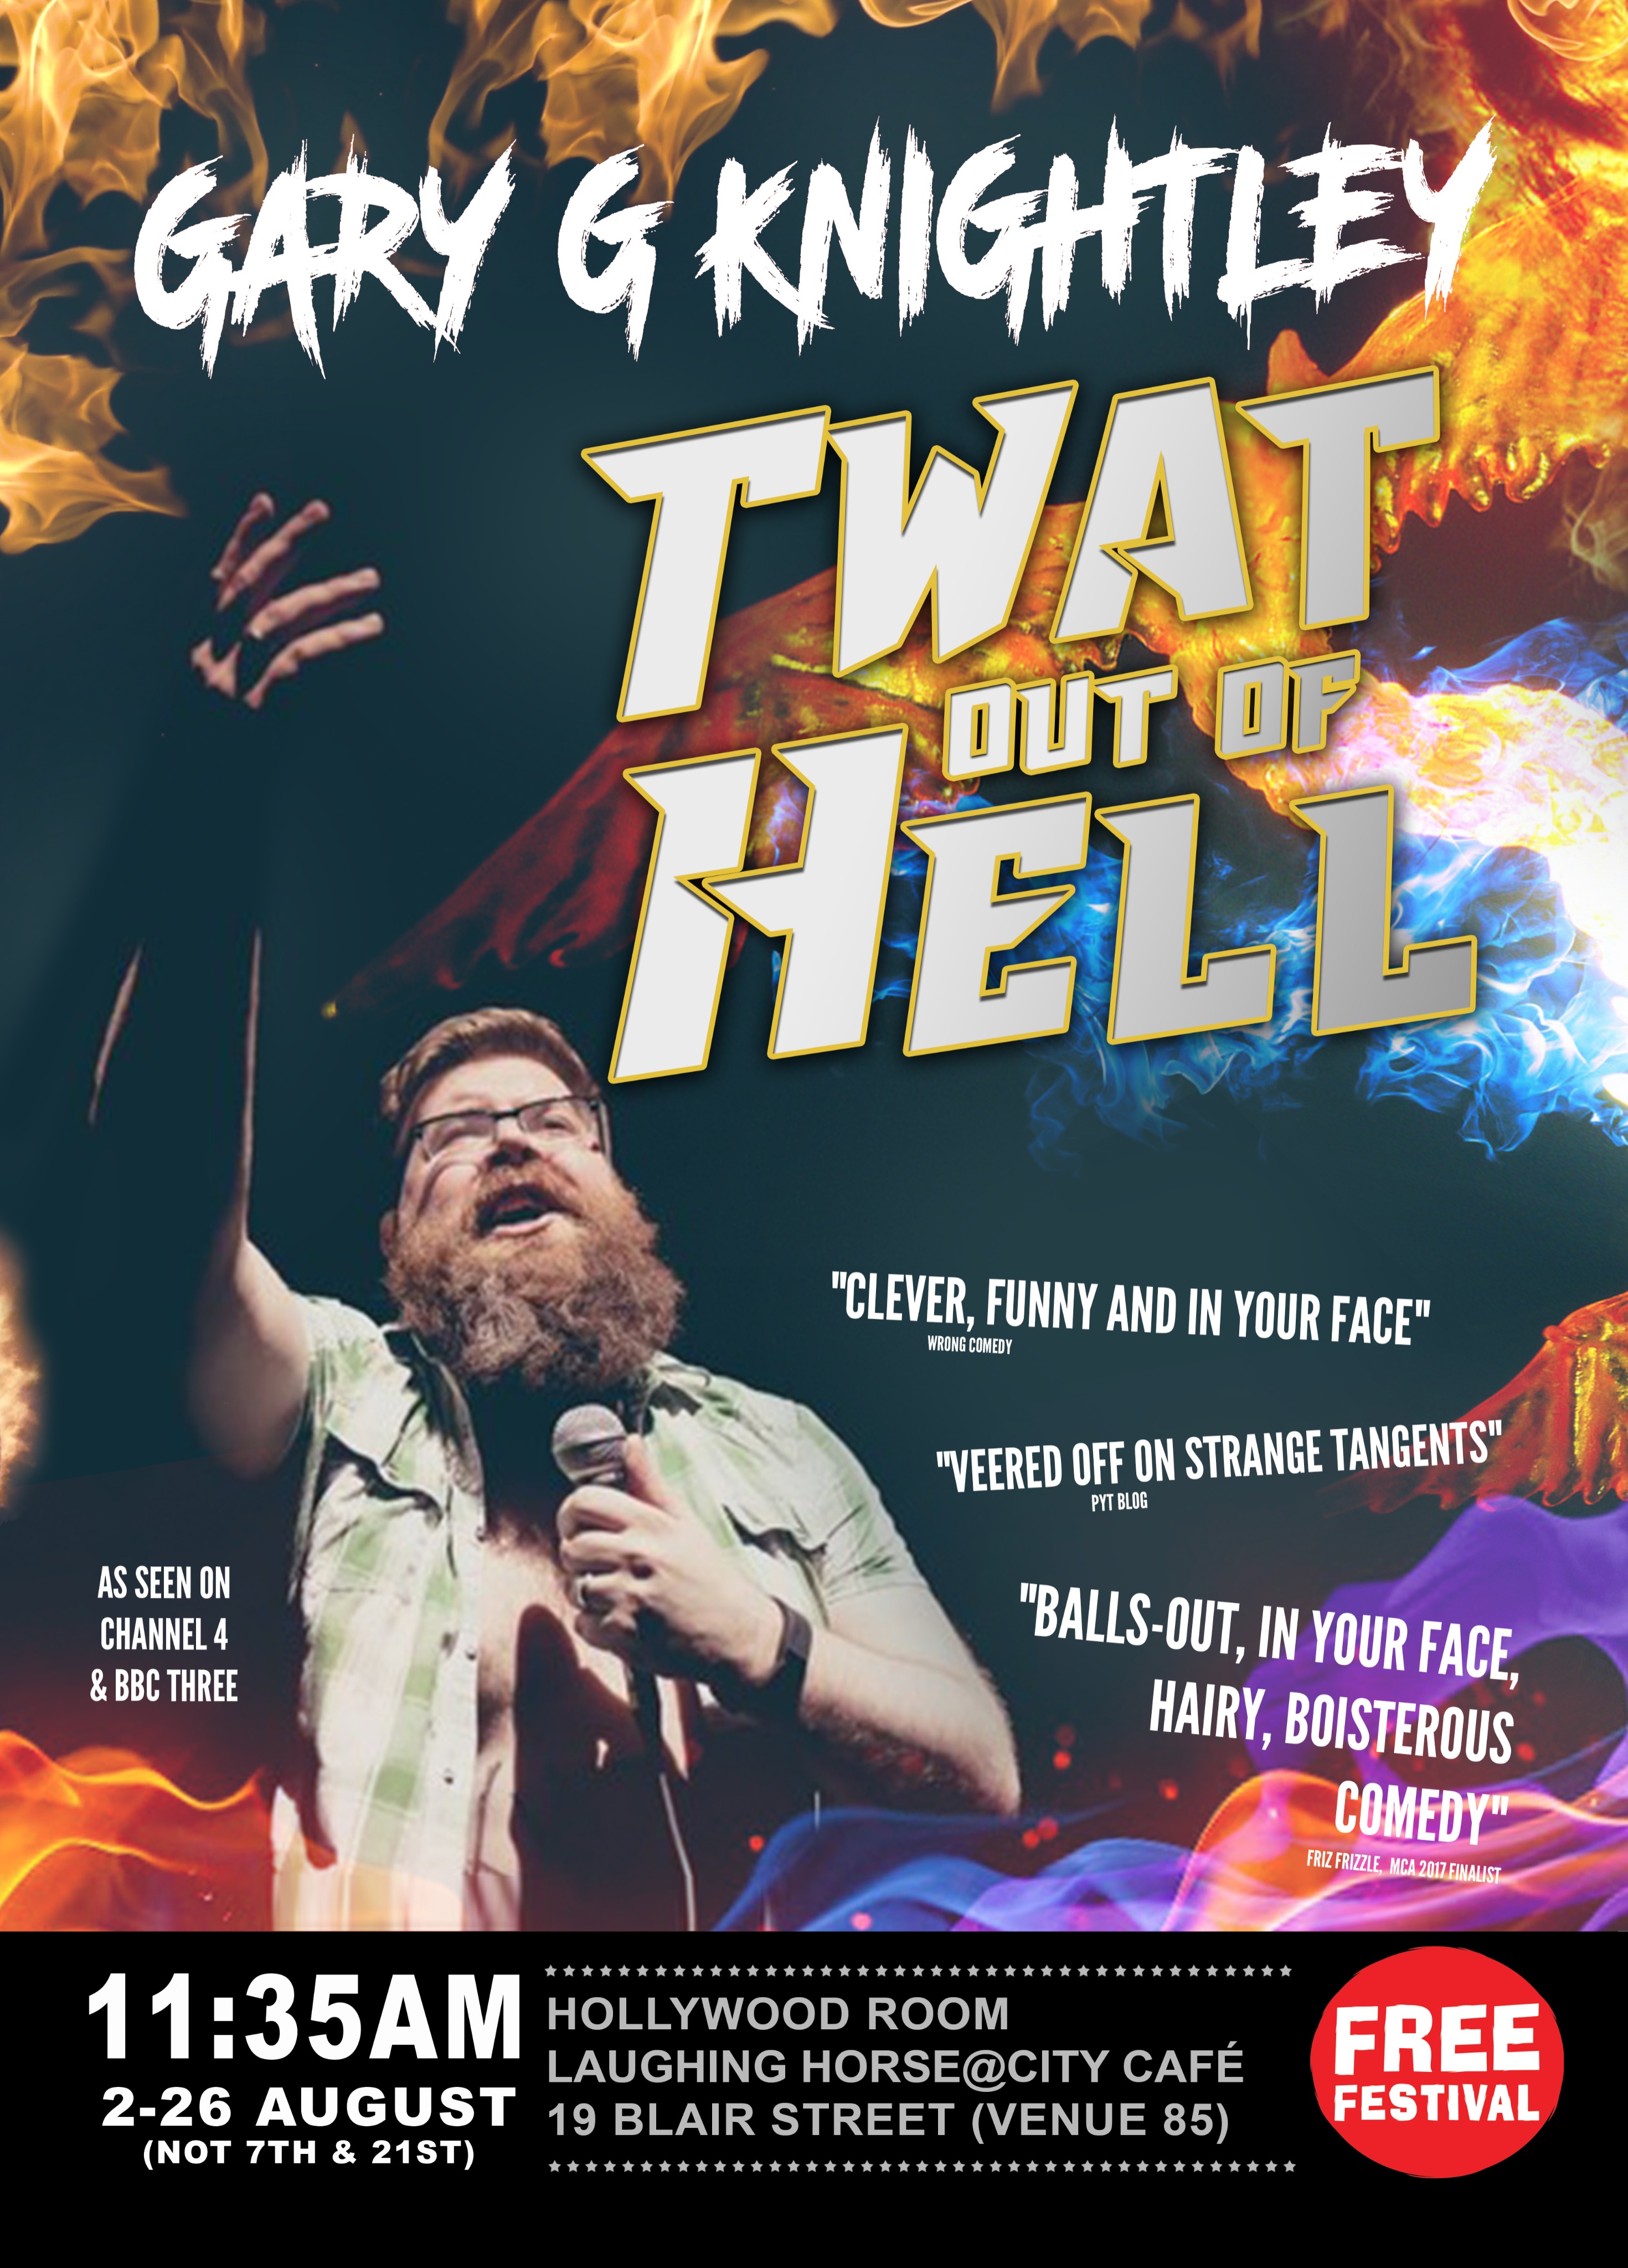 The poster for Twat Out of Hell